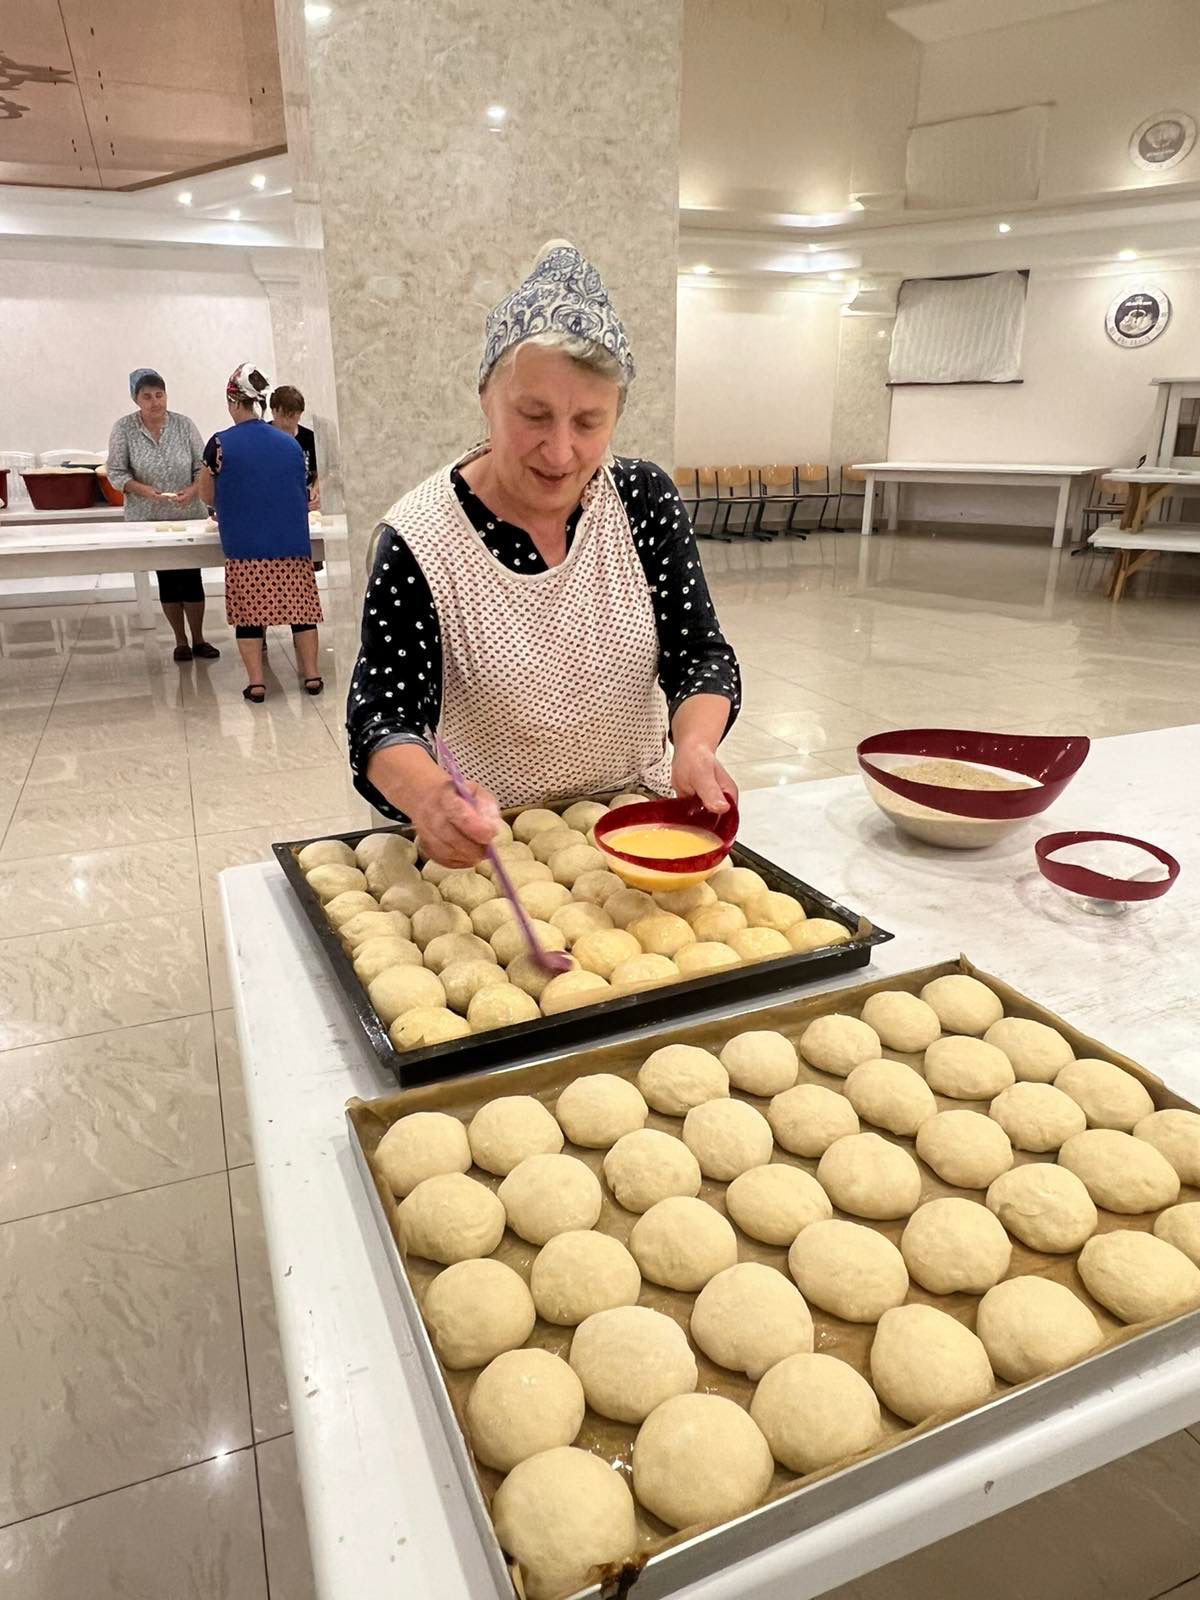 A woman is preparing a tray of dough.